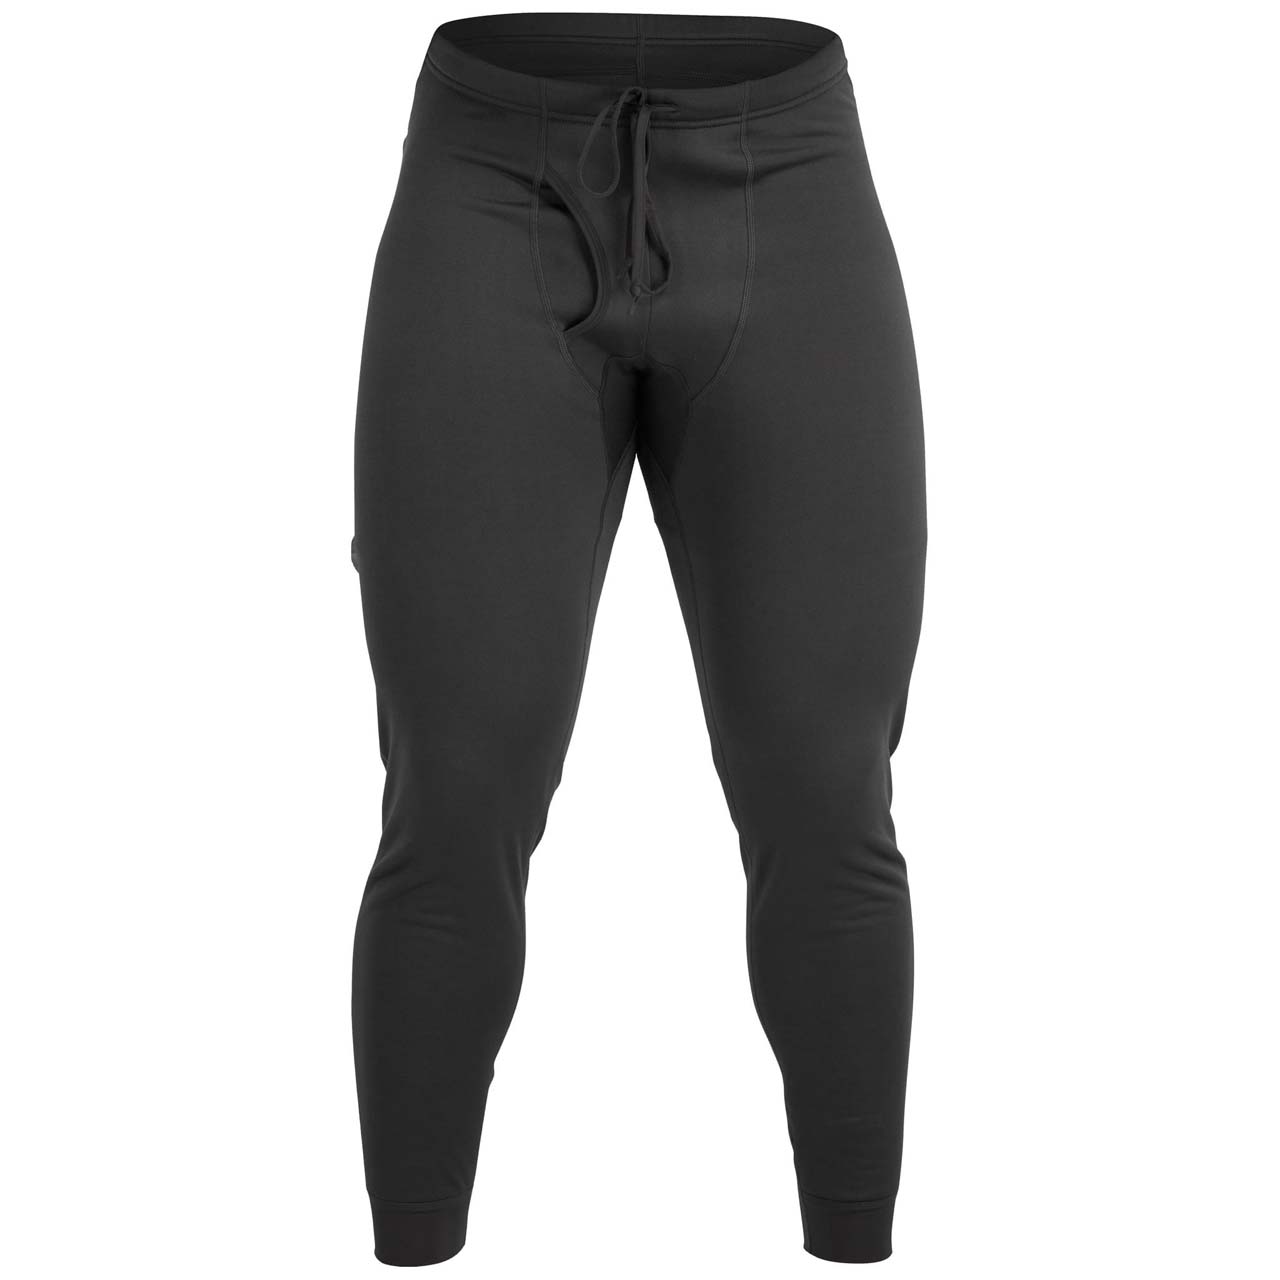 NRS Expedition Weight Pant - Graphite, S von NRS